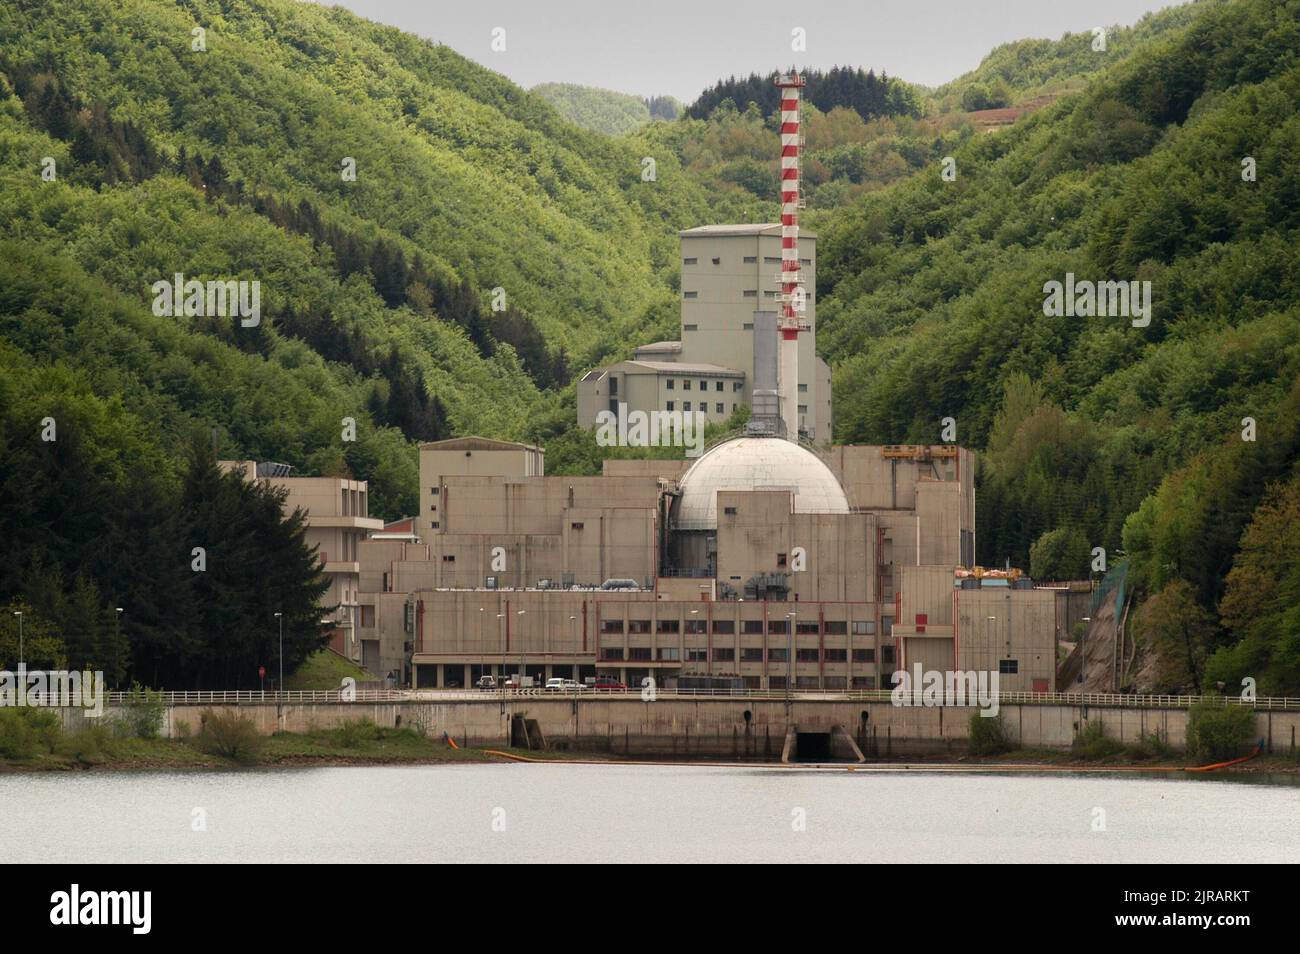 Former Brasimone Lake experimental nuclear power plant (Bologna, Italy), currently converted by ENEA (National agency for the New technology, Energy and Atmosphere) in a research center for the developmentt of technologies of controlled thermonuclear fusion, innovating nuclear systems and environmental monitoring. Stock Photo